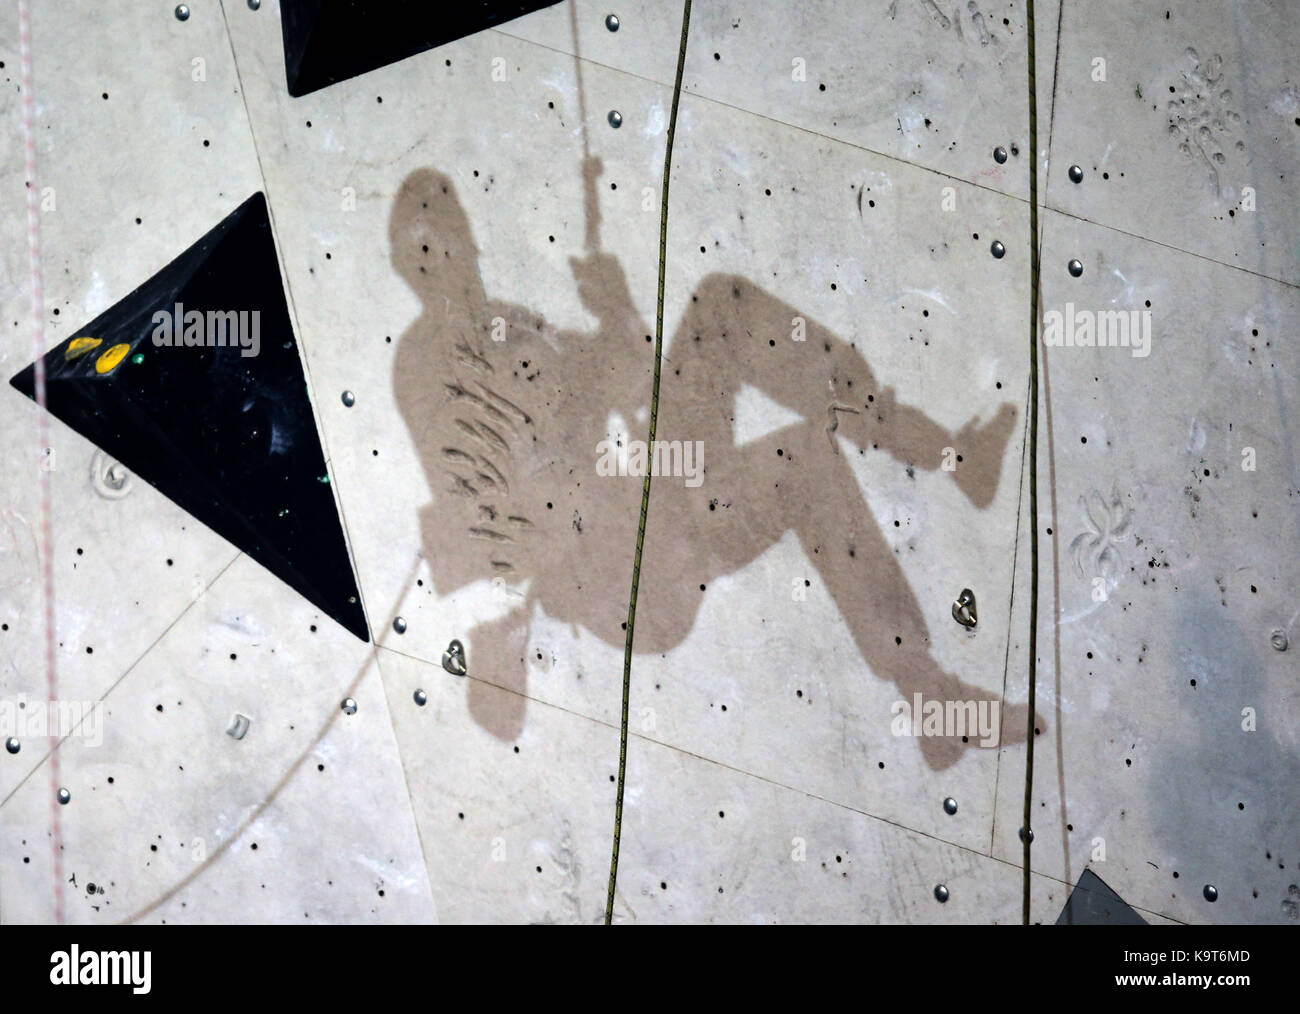 Shadow of France's Julien Gasc in the final of the Mens AL-2 (amputation lower) climb during the IFSC Climbing World Cup at the Edinburgh International Climbing Arena. PRESS ASSOCIATION Photo. Picture date: Sunday September 24, 2017. Photo credit should read: Jane Barlow/PA Wire. RESTRICTIONS: EDITORIAL USE ONLY Stock Photo